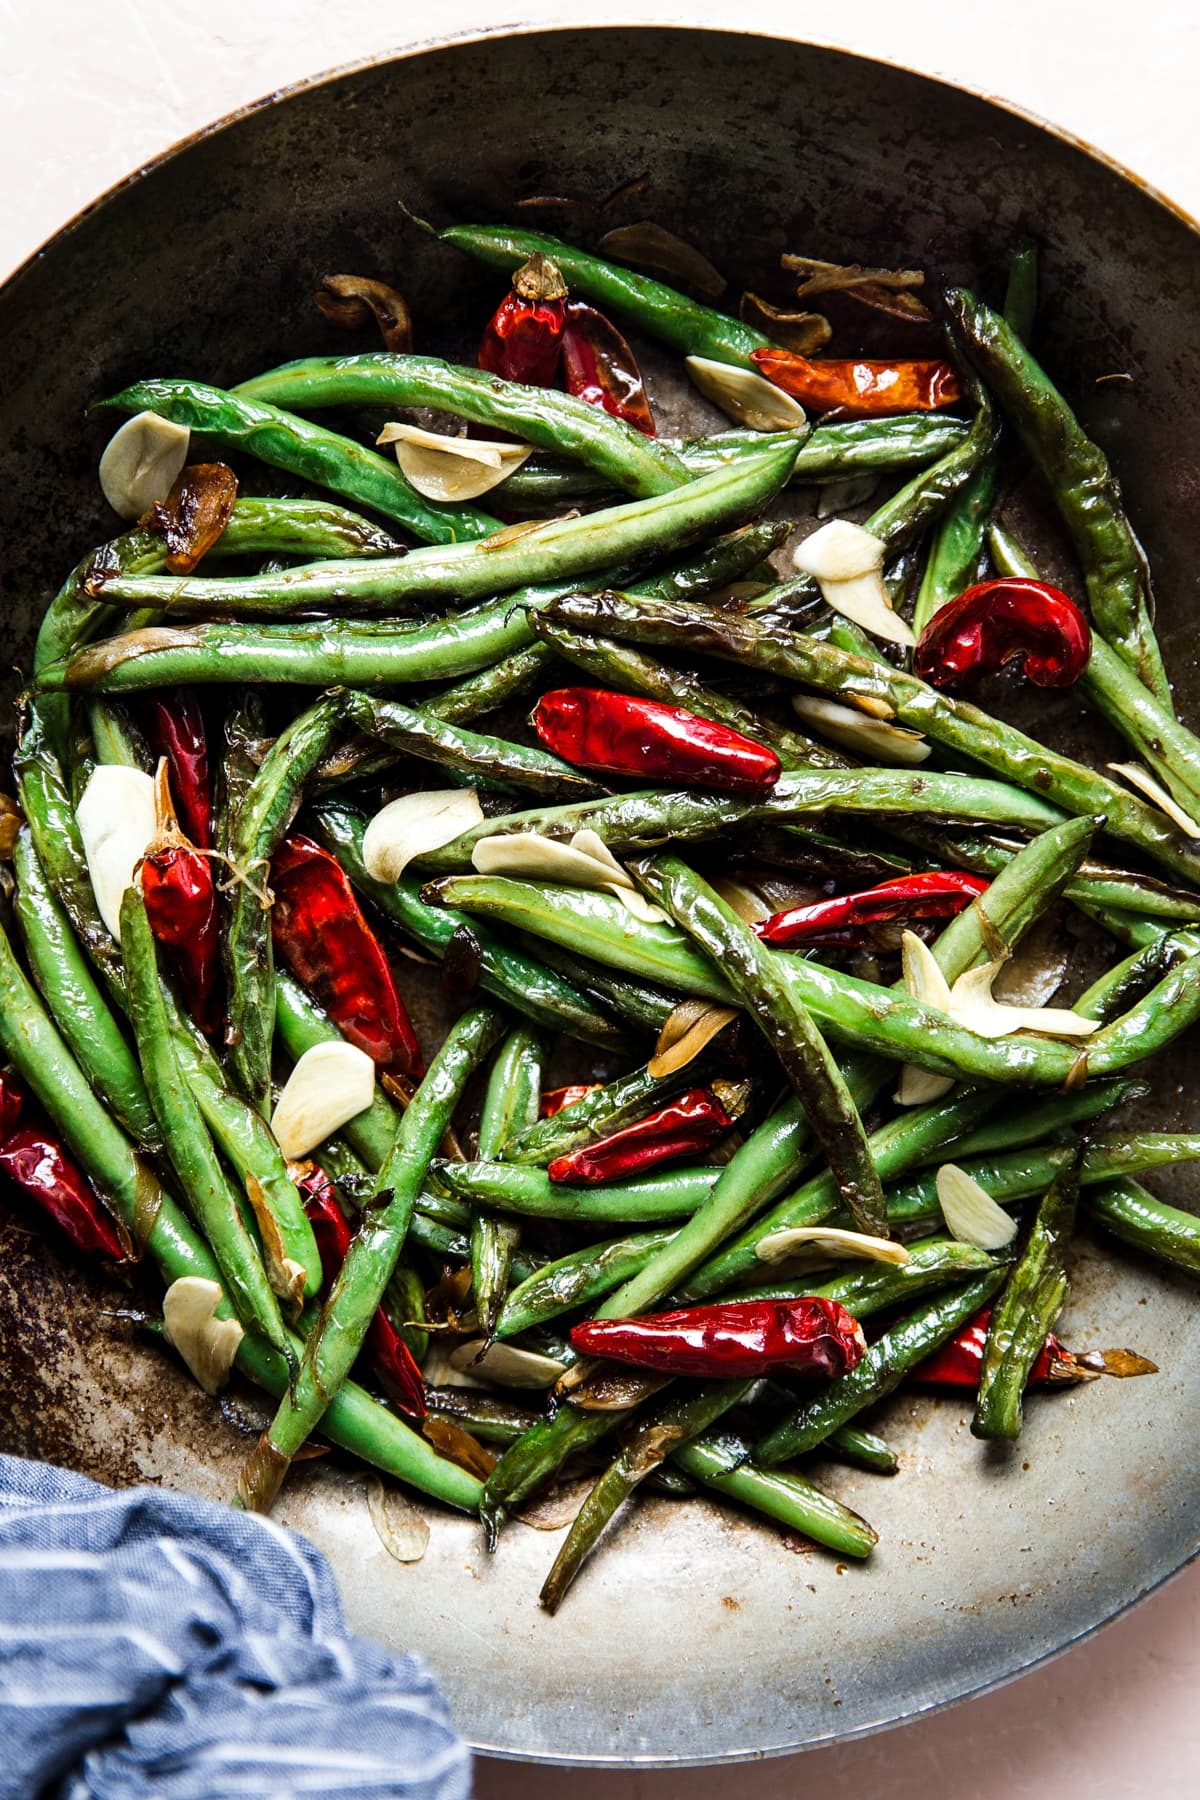 dry fried green beans in a skillet with red chillies and garlic cloves